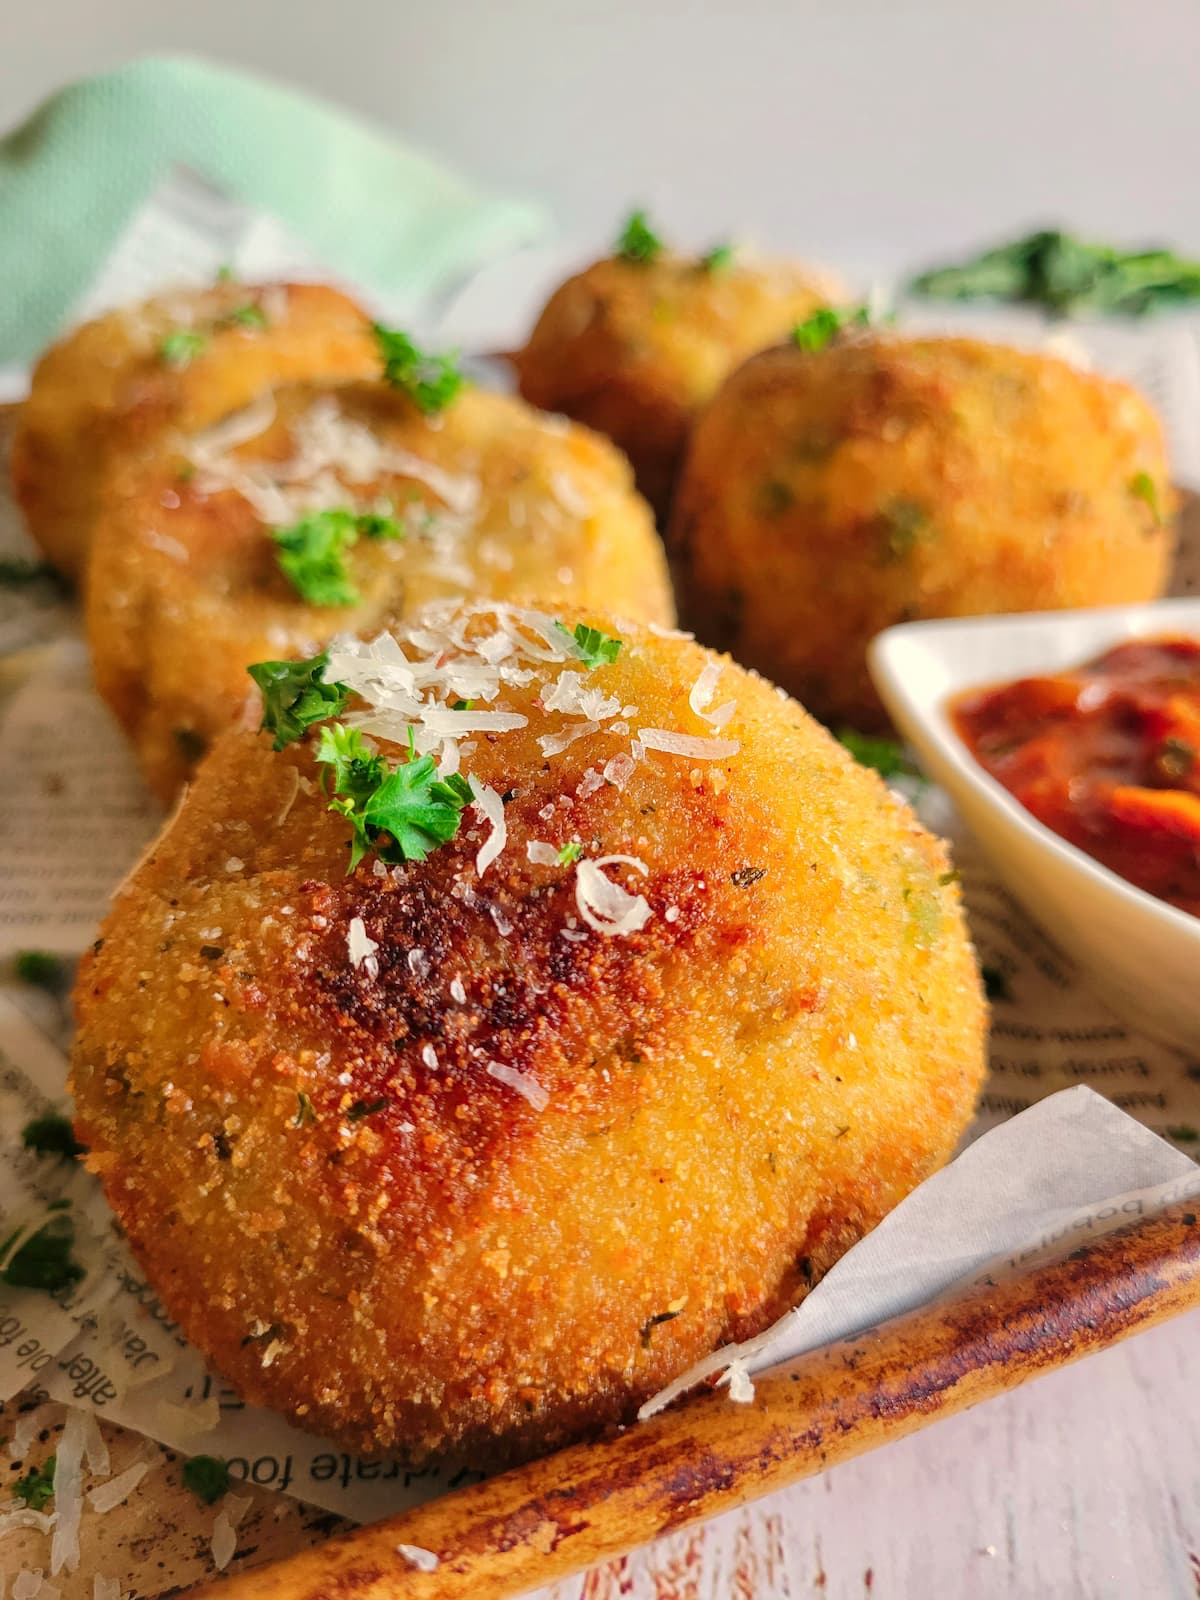 close up of a crispy rice ball garnished with fresh parsley and parmesan cheese on a sheet pan with the rest of them, tomato sauce on the tray